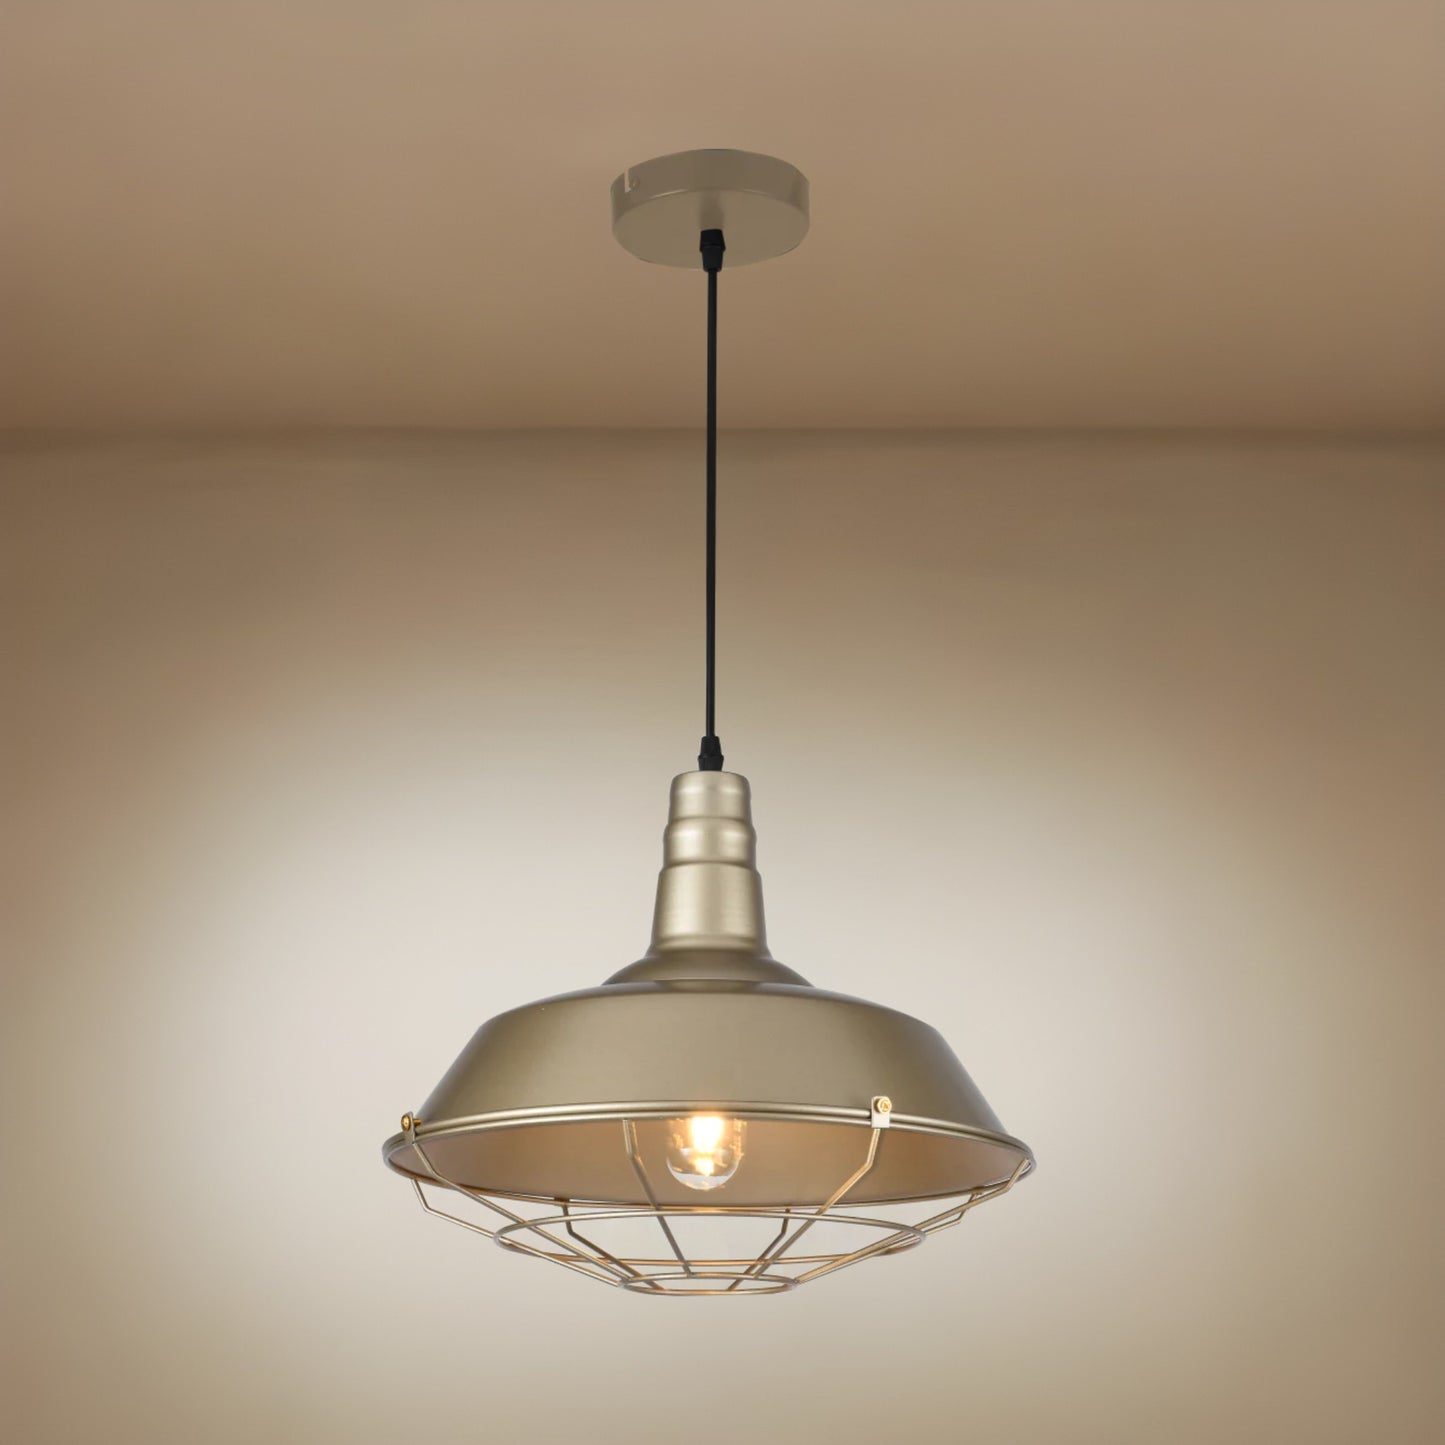 Our large Solen pendant light is a stylish addition suitable for every room, its metal cage shape creates amazing shadow effects on the ceiling and walls. The lamp looks great with a filament light bulb, especially in industrial and electric interiors.